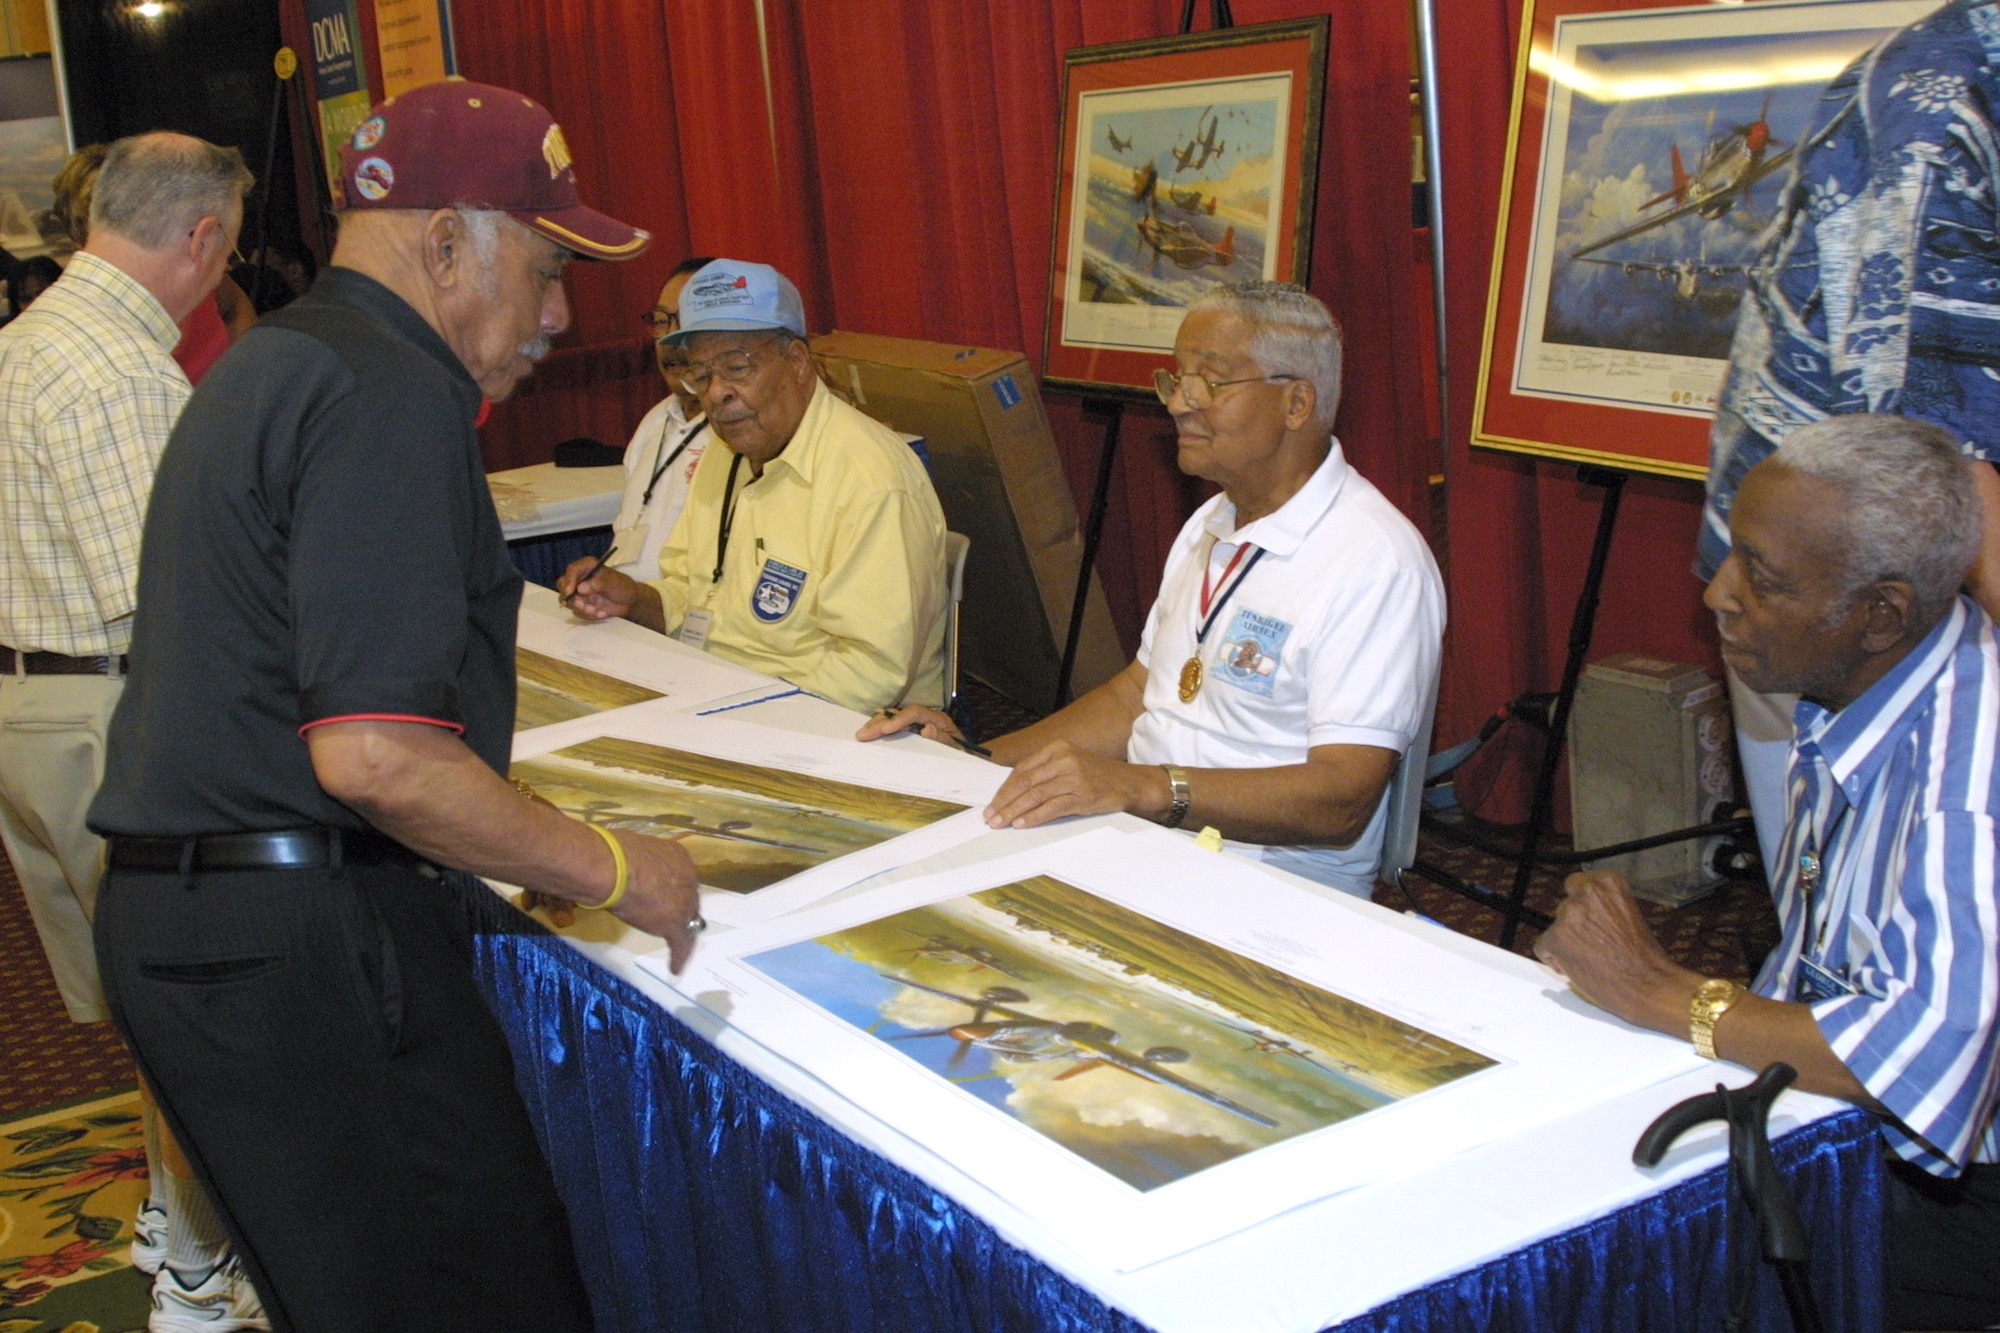 Five Tuskegee Airmen prepare to autograph lithographs Aug. 6, 2008, illustrating various missions the men flew during World War II. Retired Lt. Col. Bill Holloman (standing) went on to become the Air Force's first African-American helicopter pilot. Colonel Holloman died June 11, 2010, in Kent, Wash.